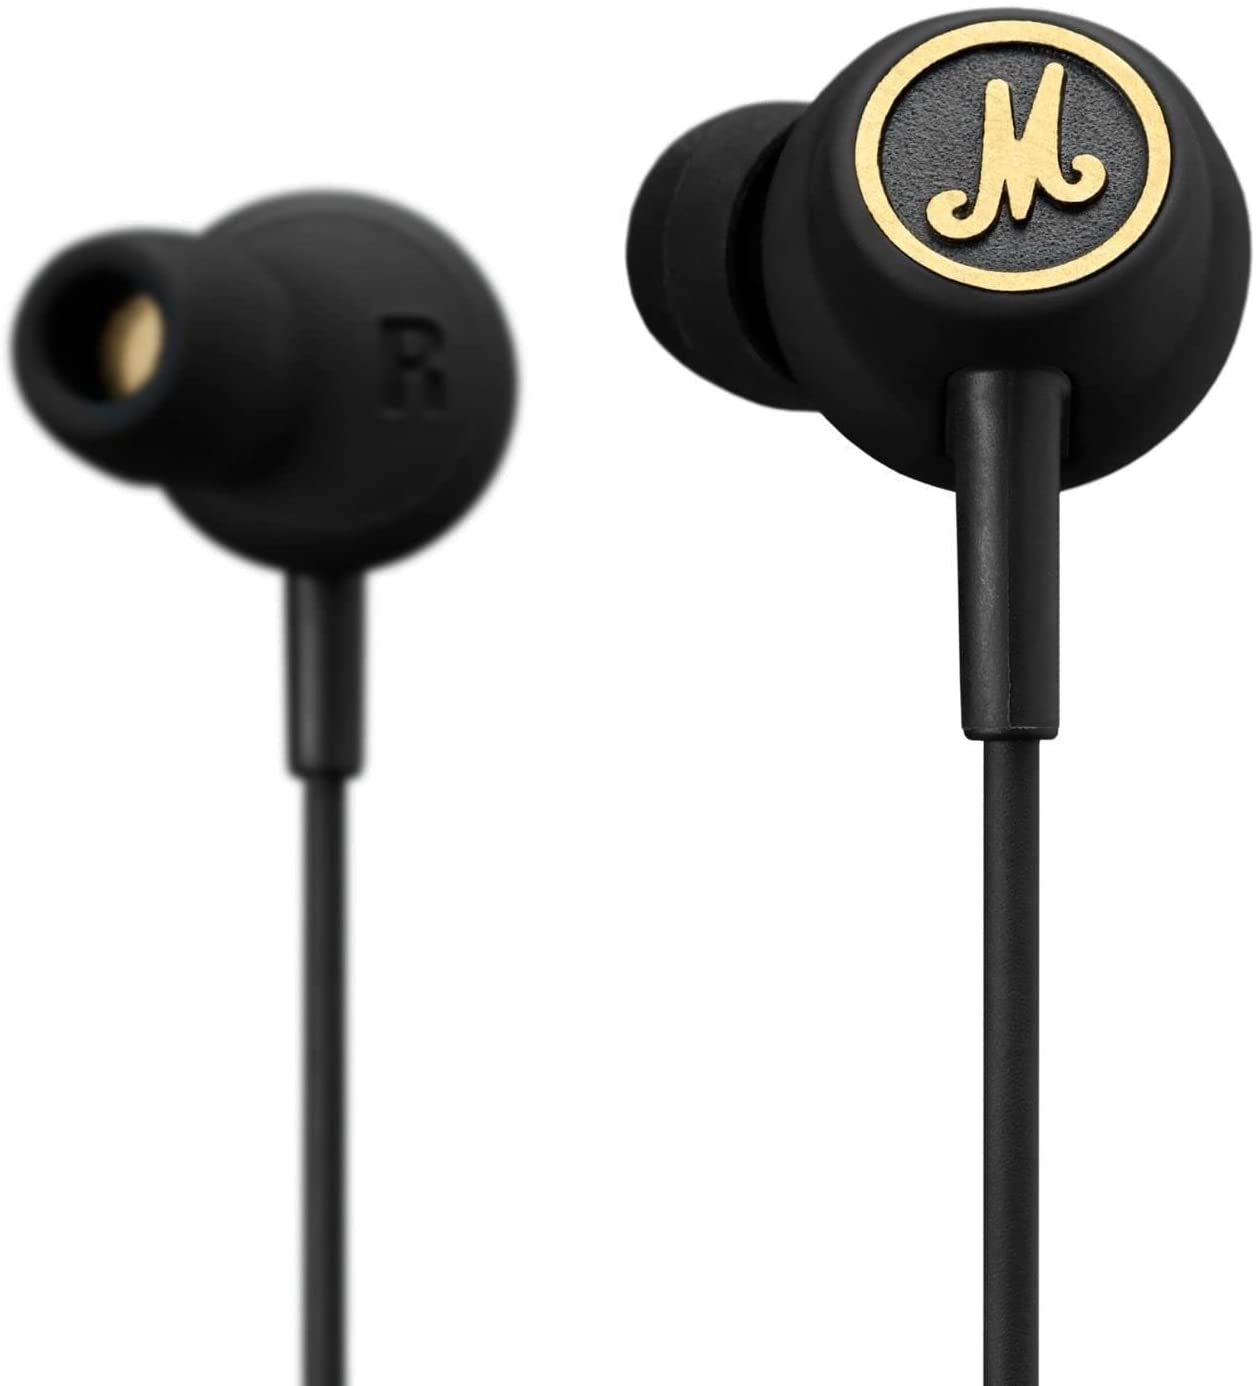 Marshall Mode / EQ In-Ear 3.5mm Wired Headphone Earphones and Interchangeable Sleeves (Black, Black Gold)